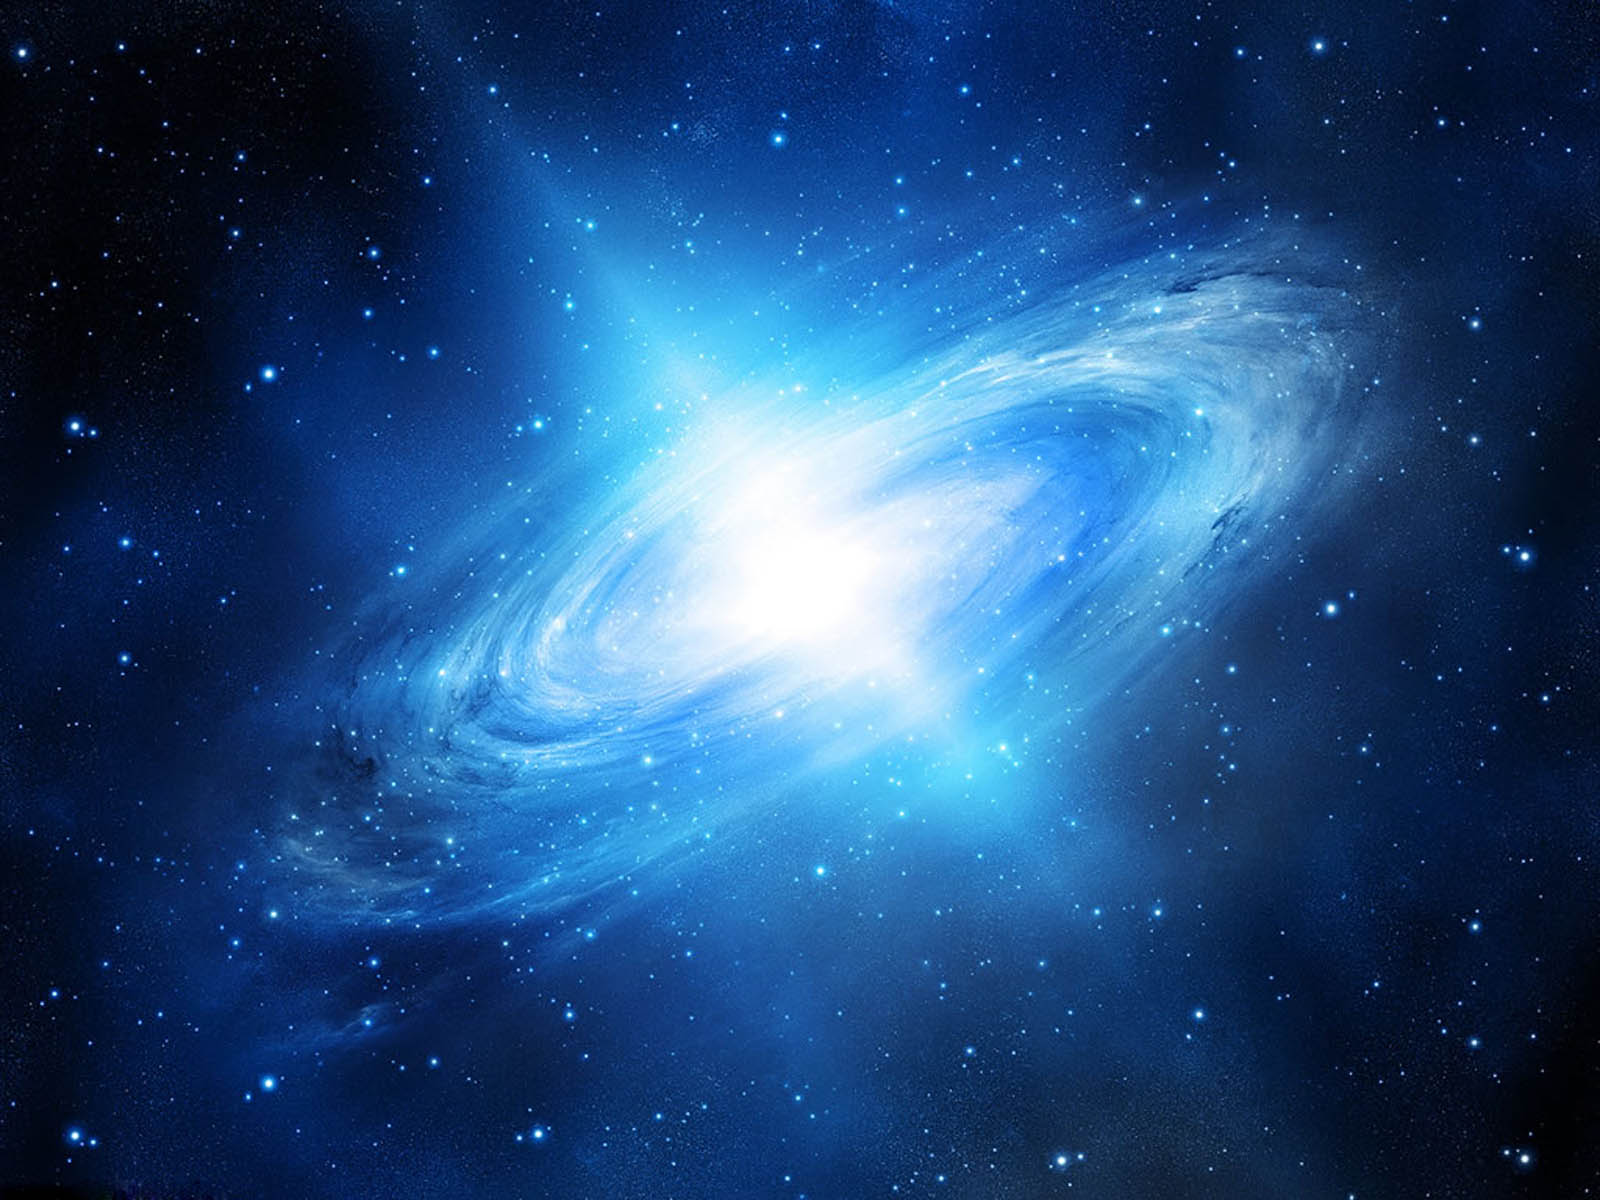  Space Wallpapers Images Photos Pictures and Backgrounds for 1600x1200